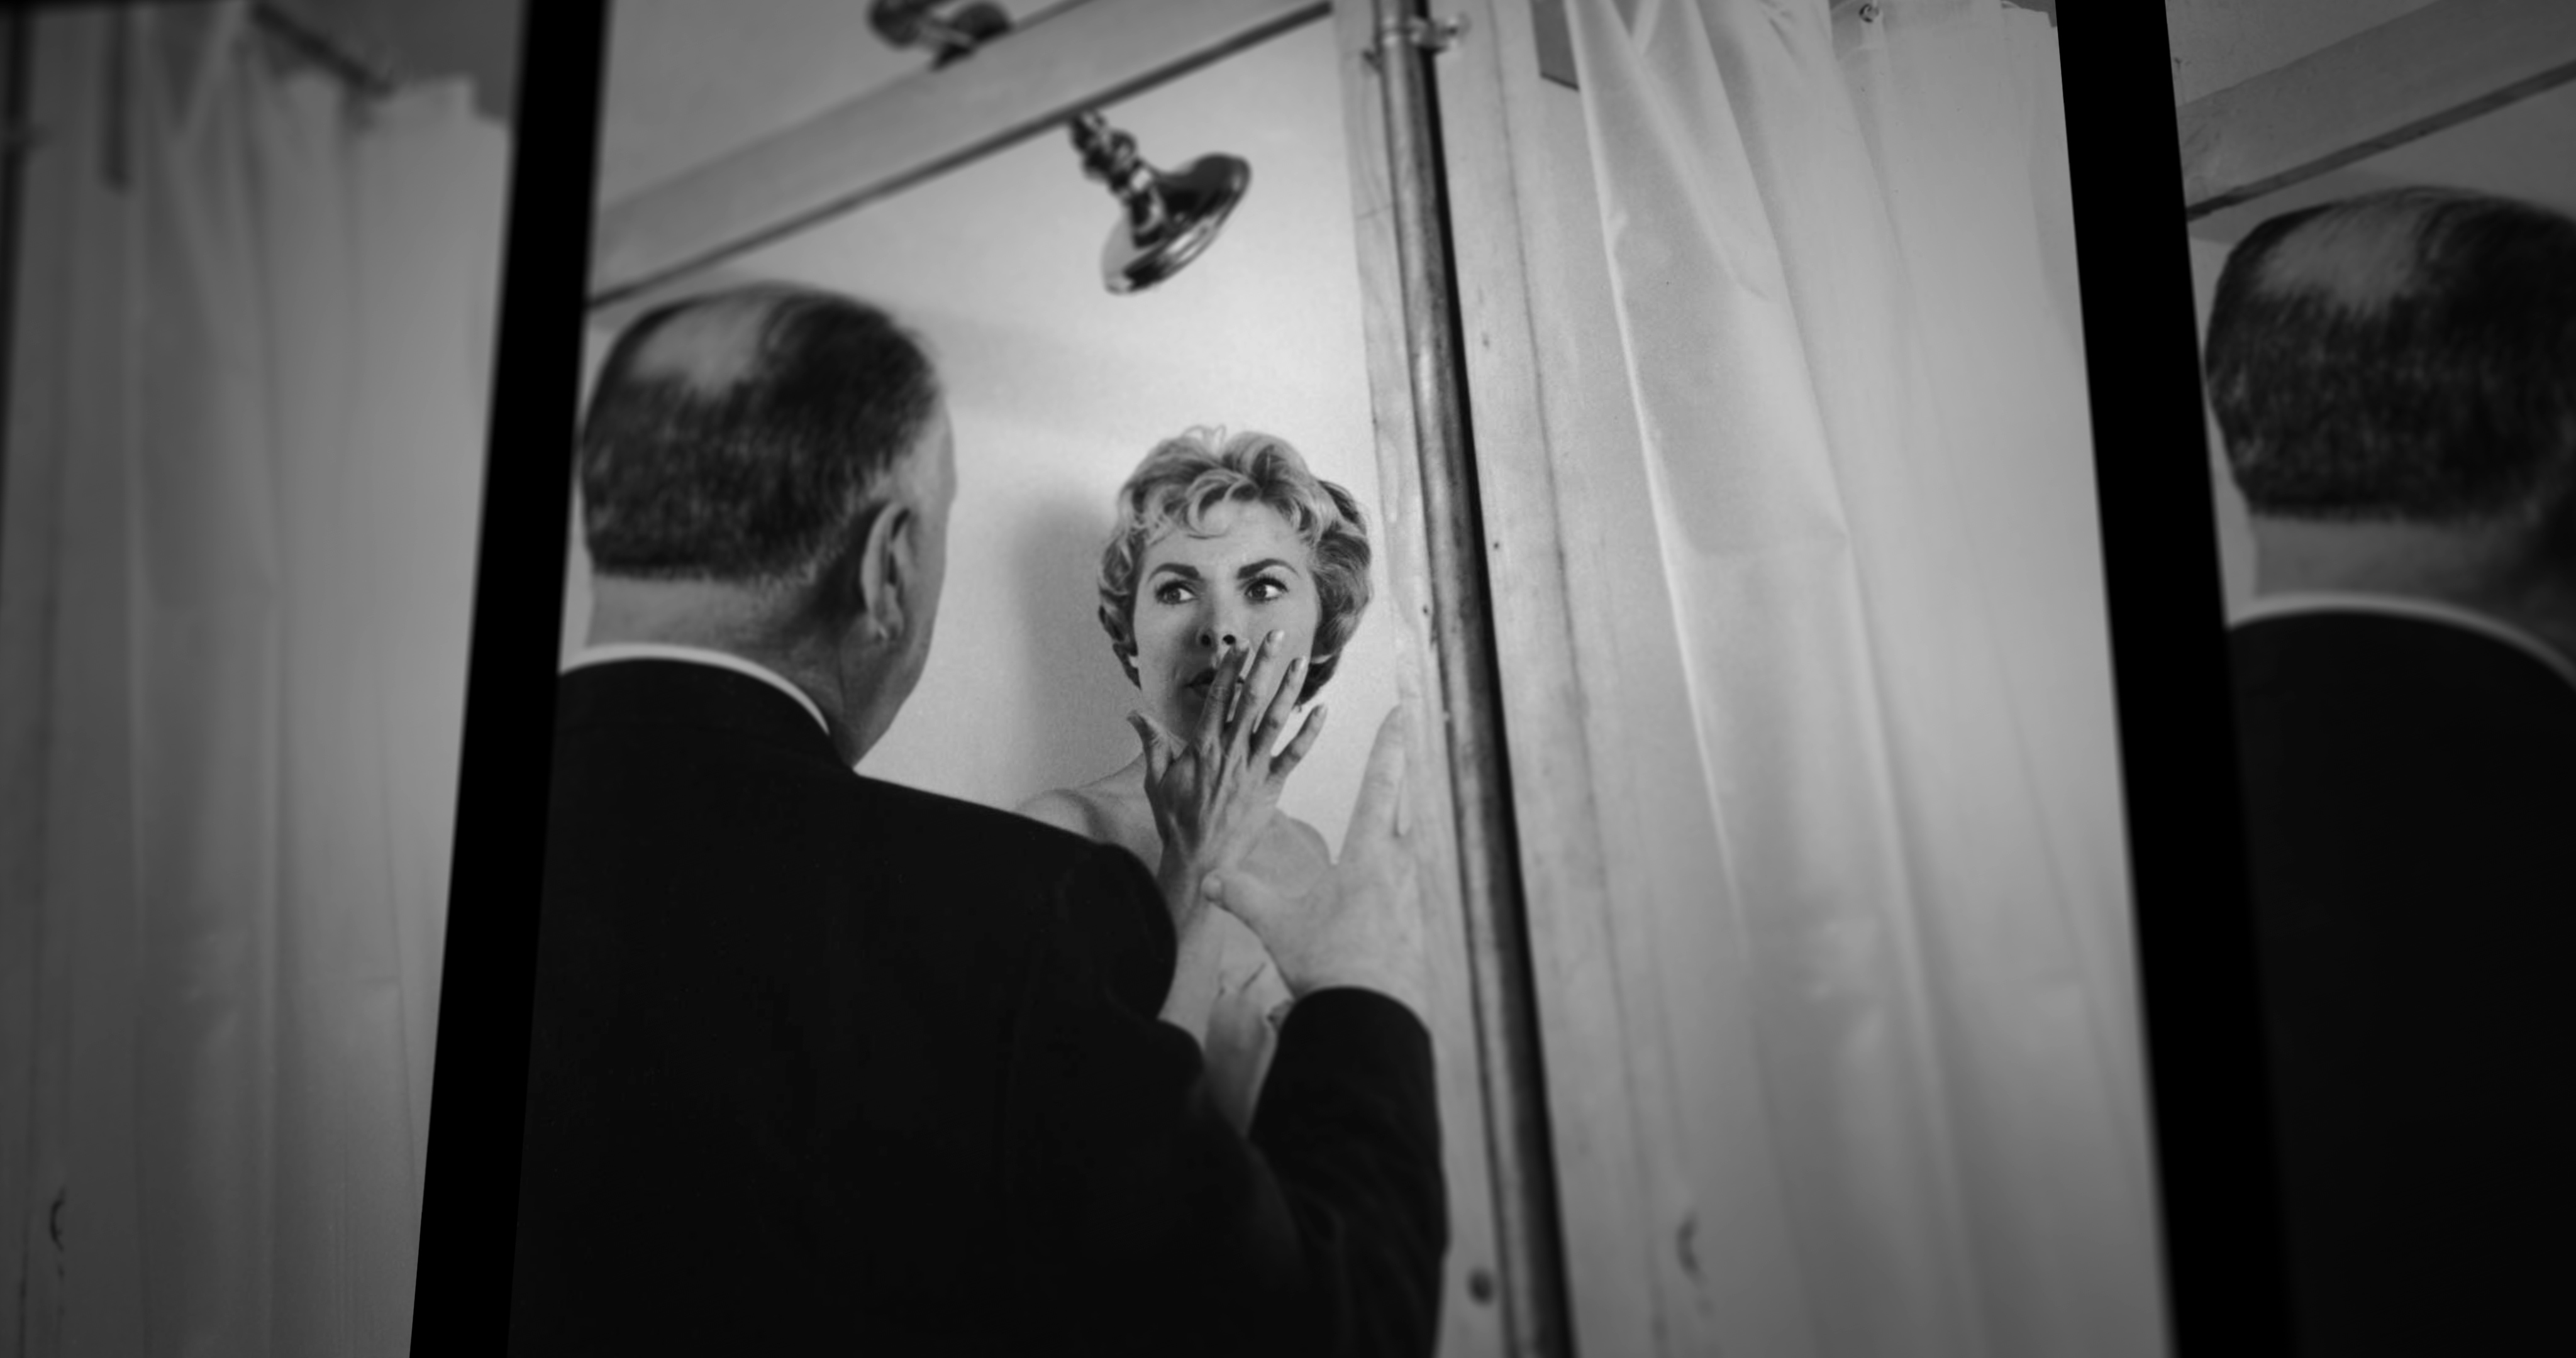 Alfred Hitchcock and Janet Leigh filming Psycho in 78/52.